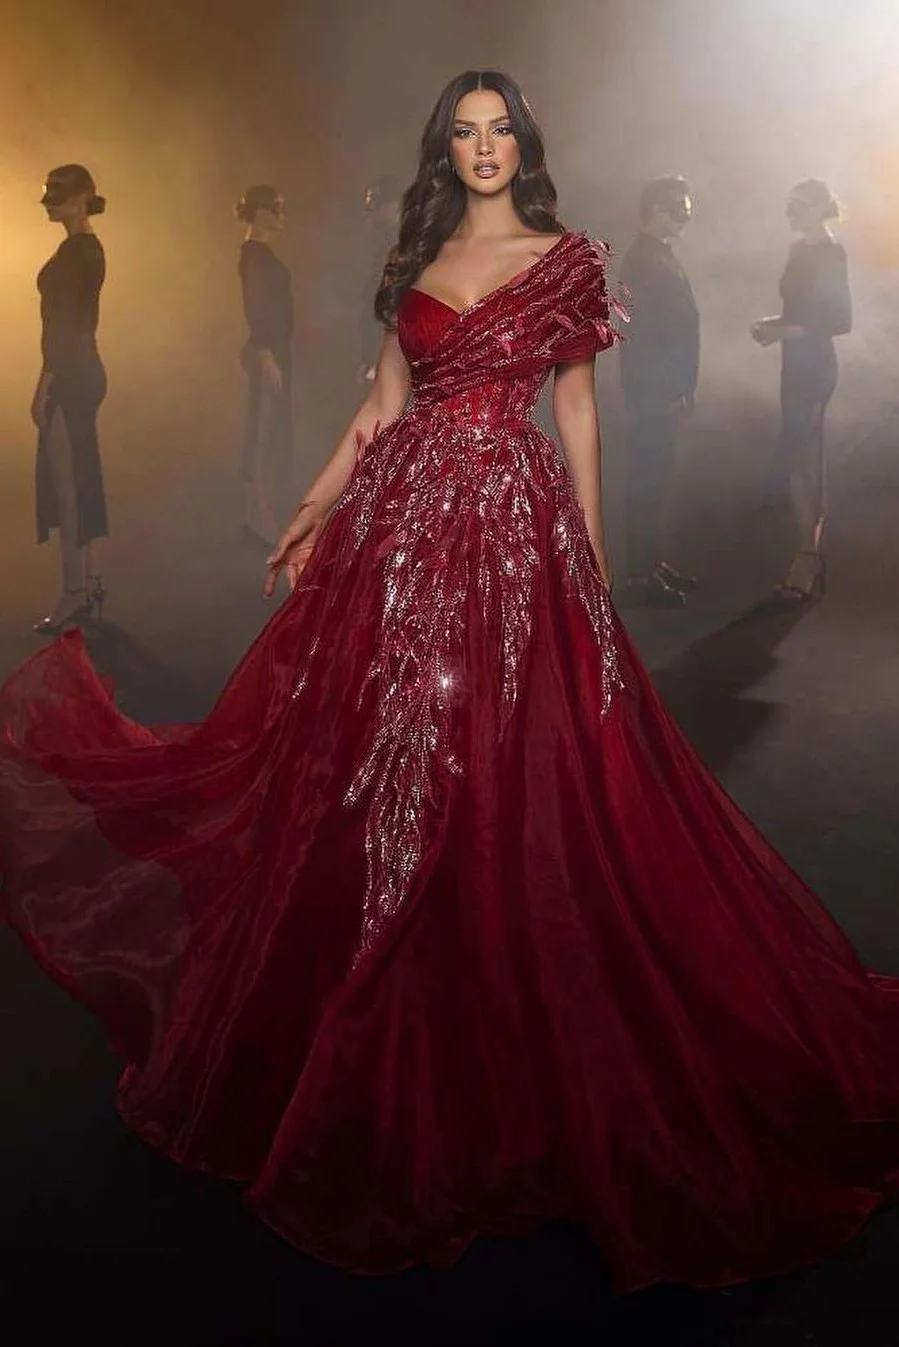 Stunning Beaded Burgundy Tulle Prom Dress One Shoulder With Feathers | Ballbellas Ballbellas